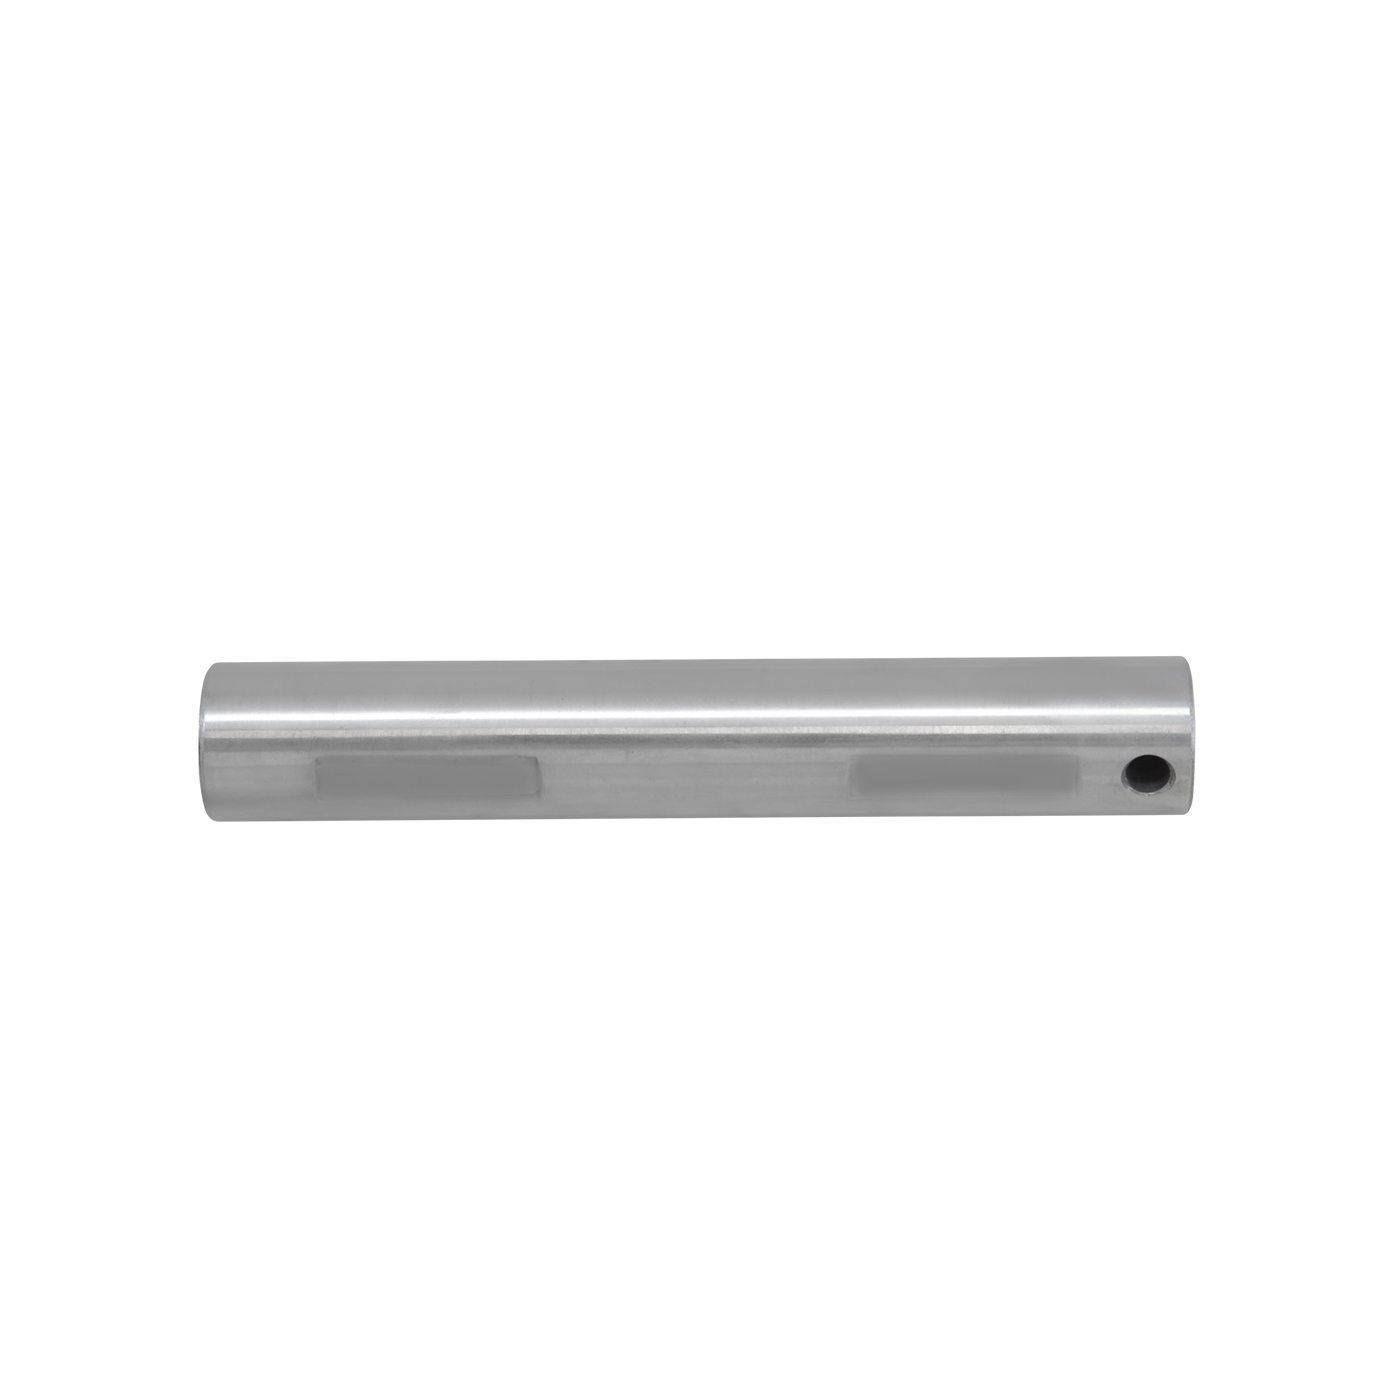 Replacement cross pin shaft for Spicer 50, standard open 